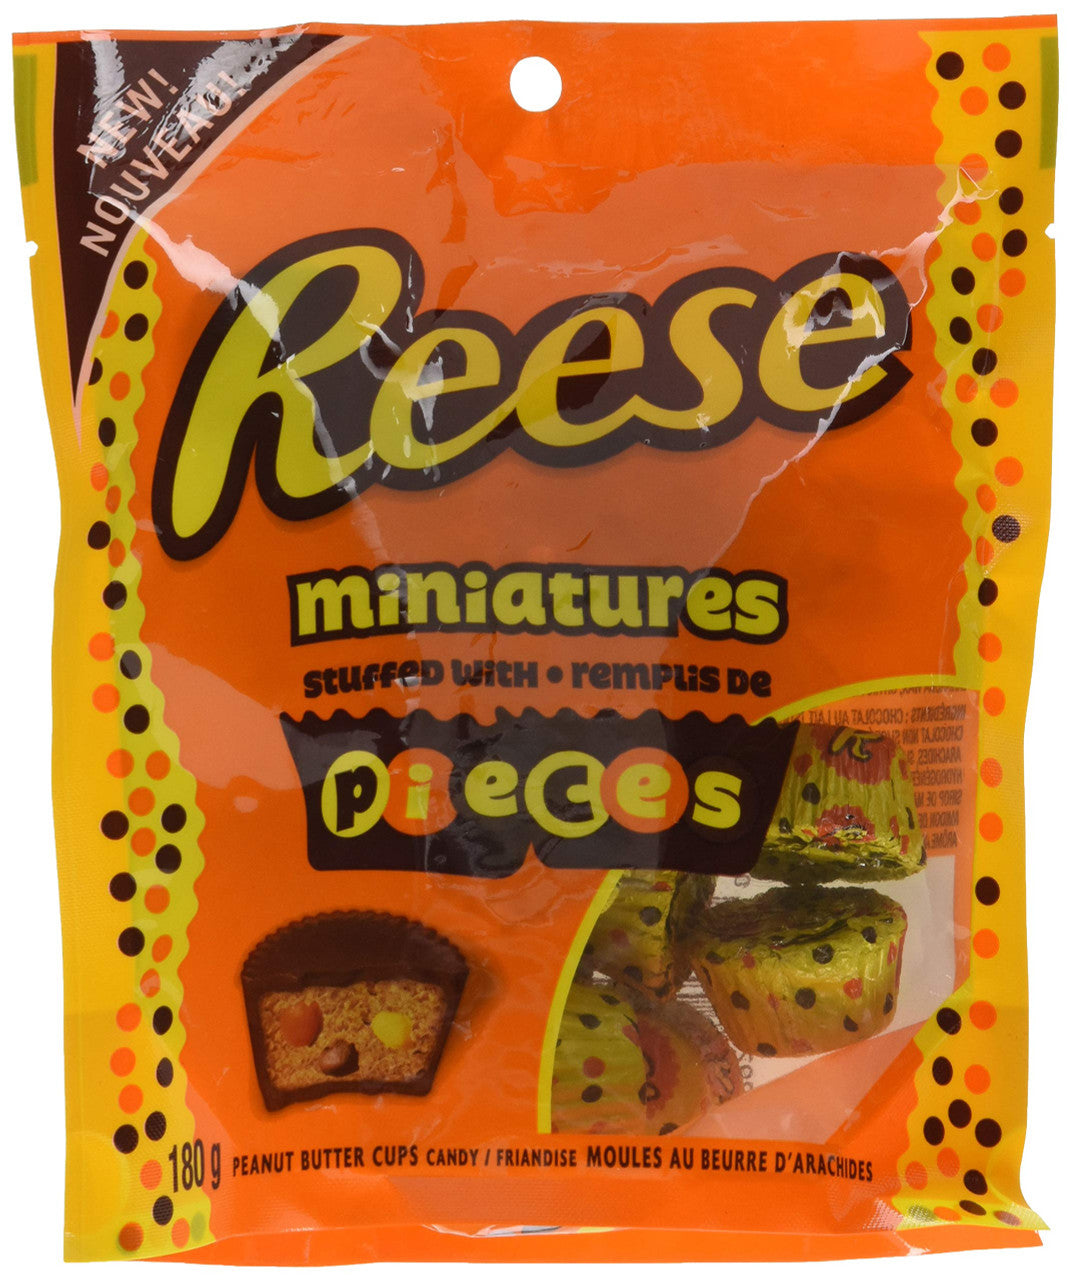 Reese's Miniatures Stuffed with Reese's Pieces, 180g/6.34oz, (Imported from Canada)